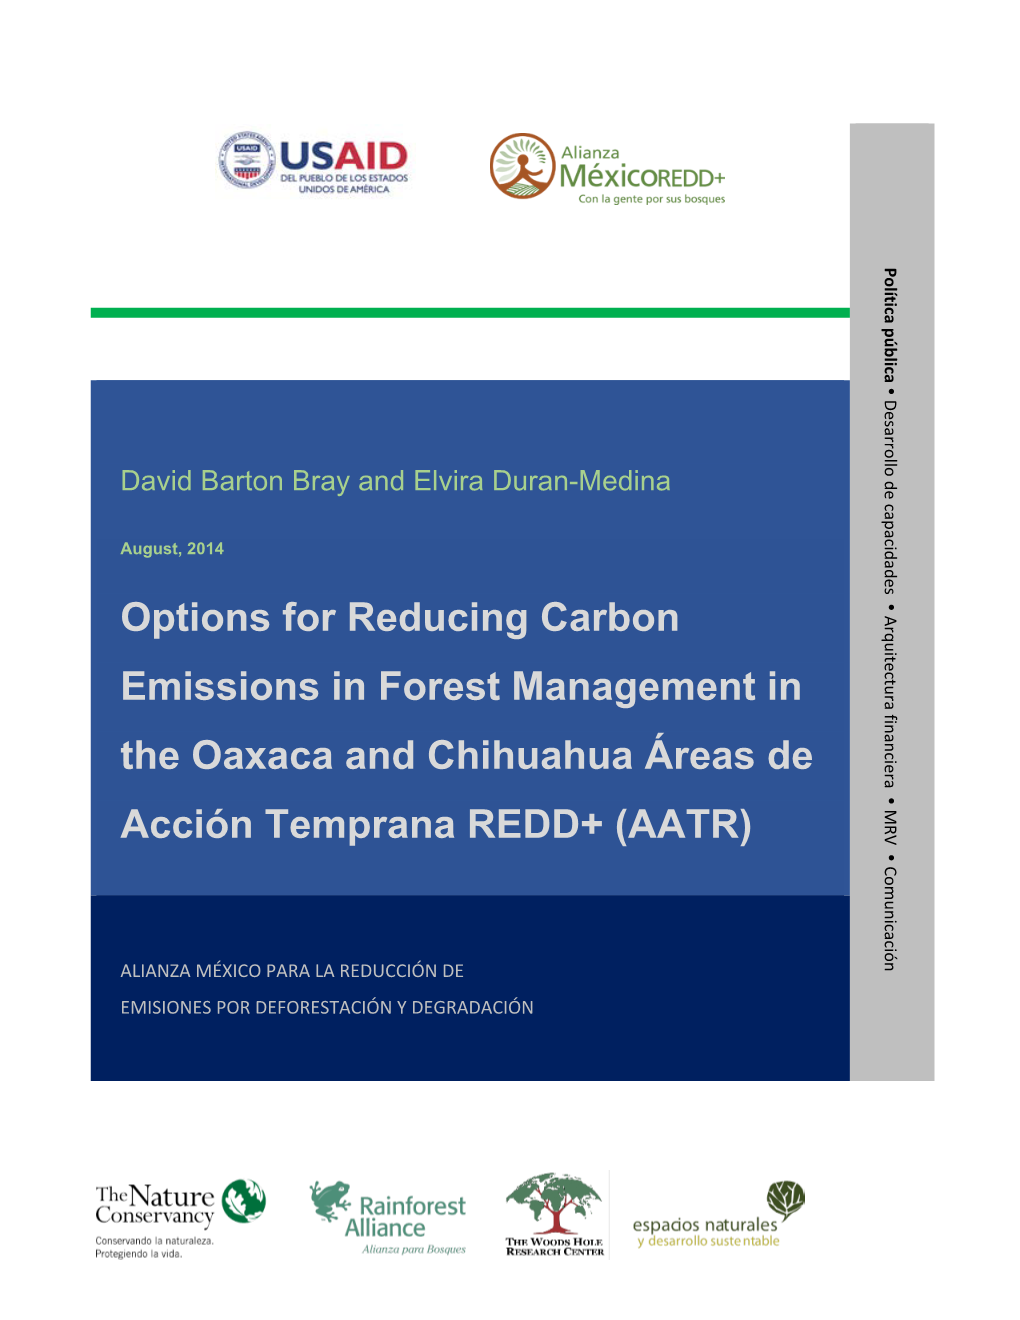 Options for Reducing Carbon Emissions in Forest Management In